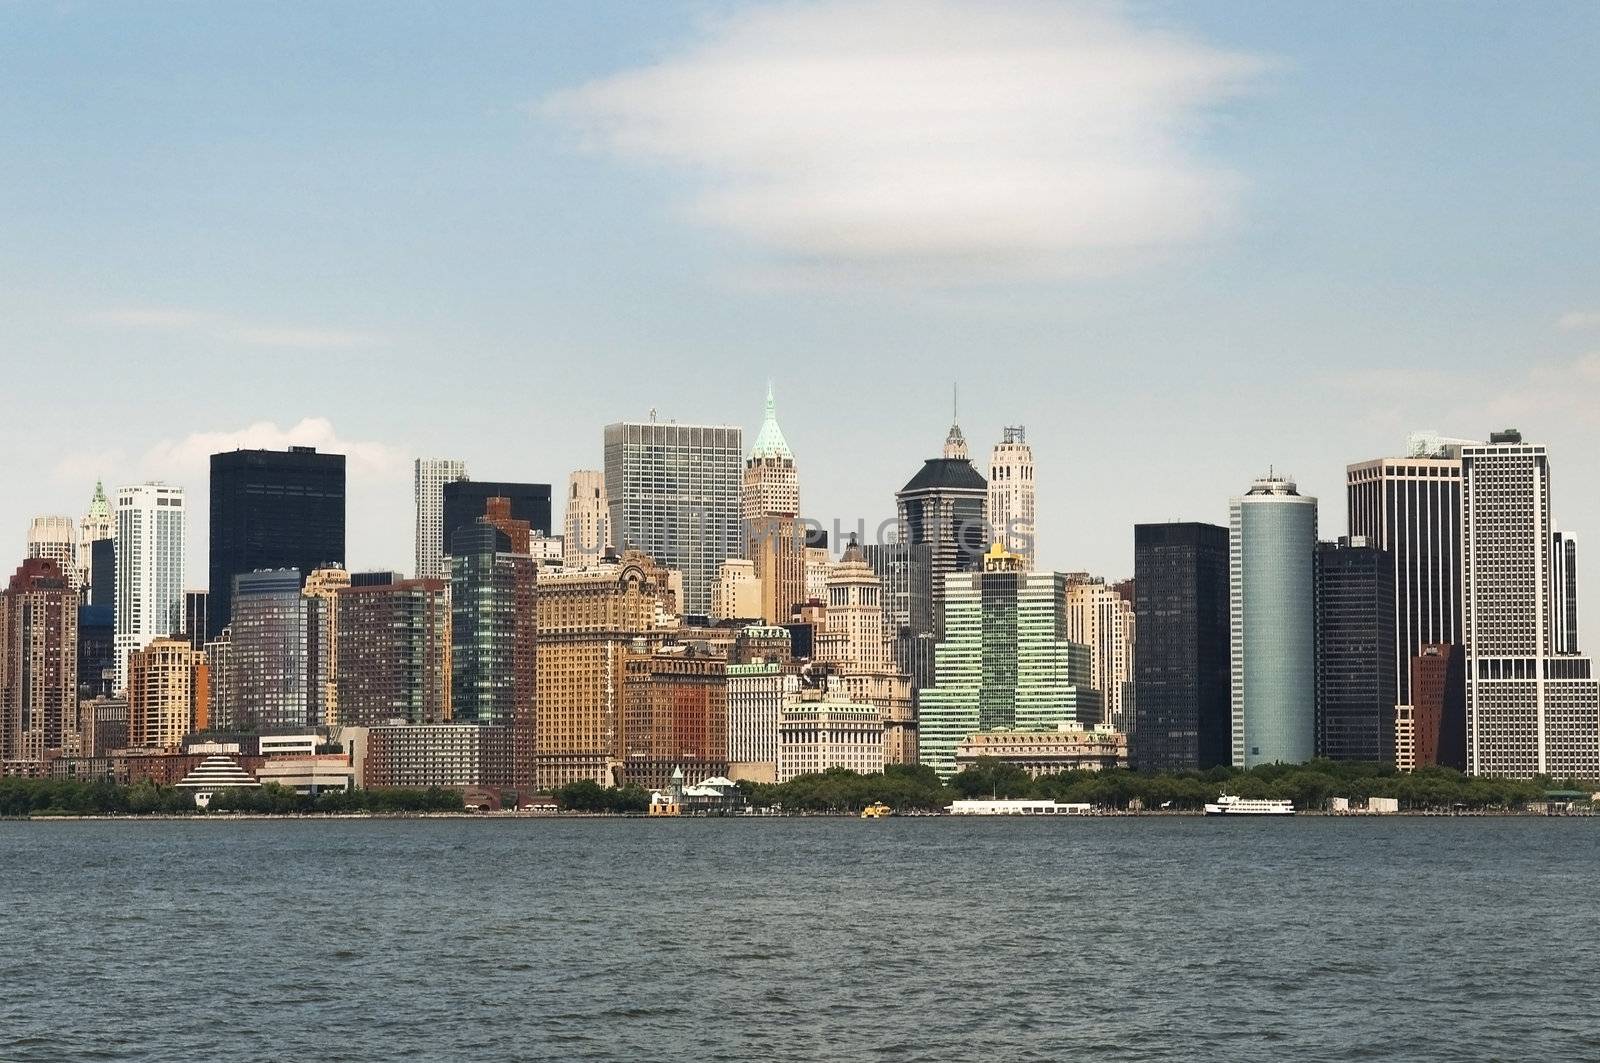 Panoramic view of the buildings and skyscrapers of down-town Manhattan, Newy York Cit